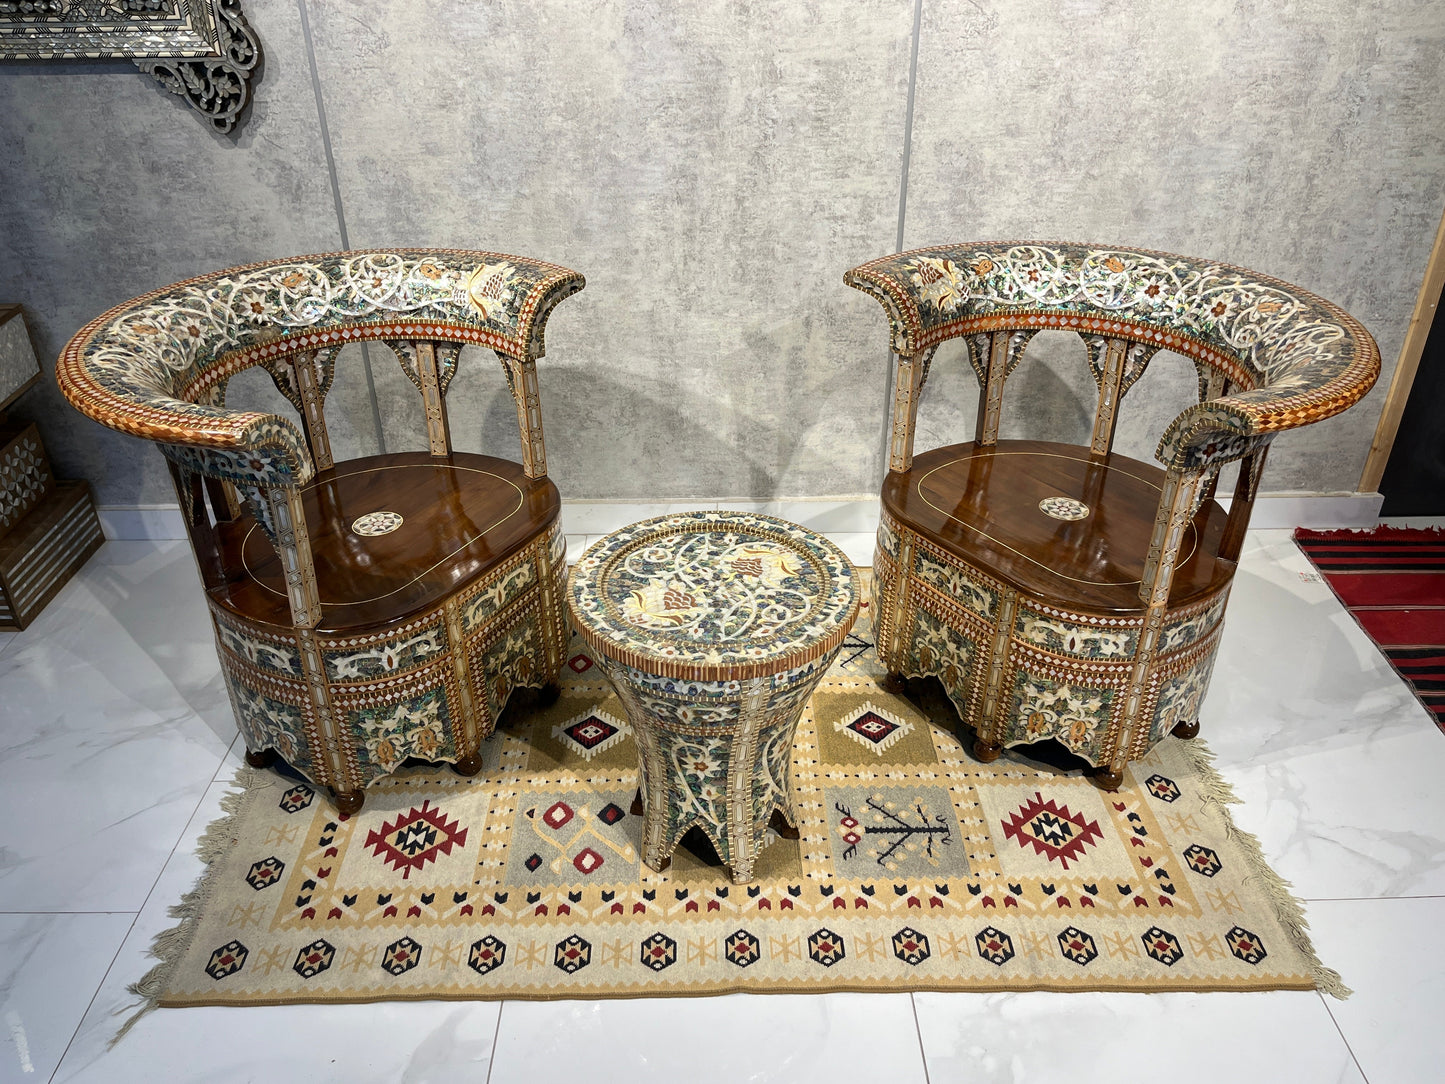 Emperor Chair & Table Set - Mother of Pearl